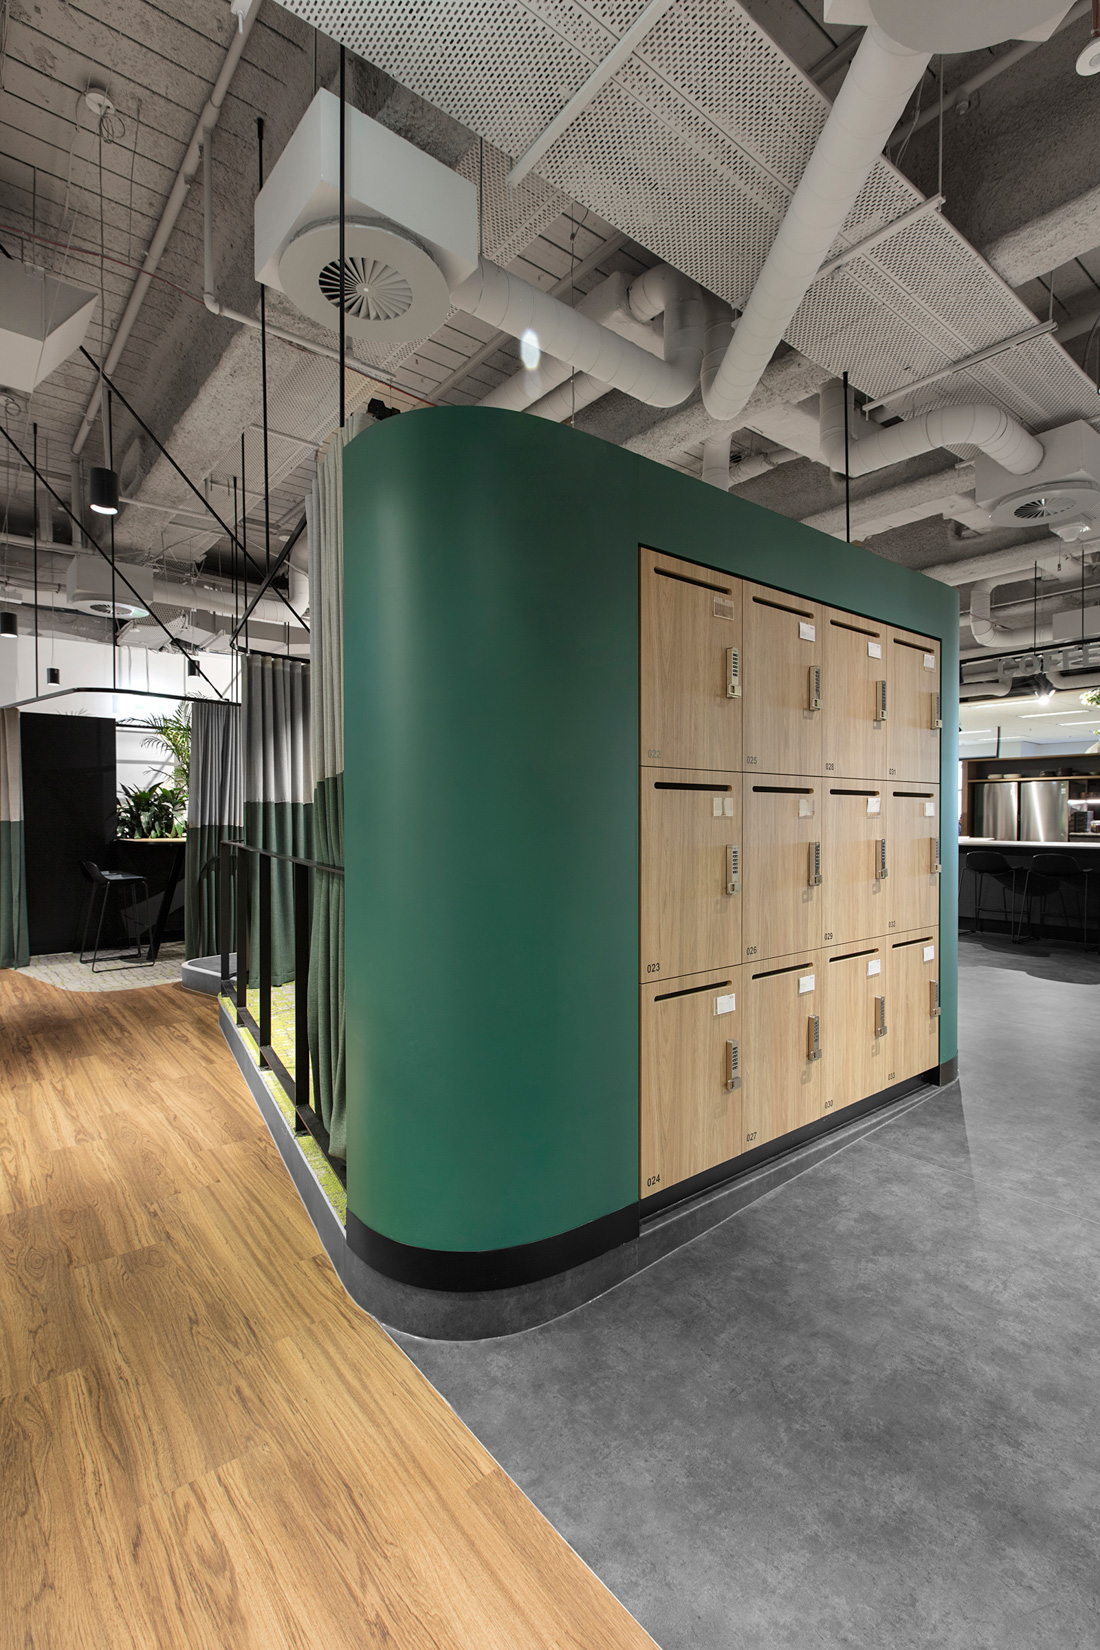 Melbourne office fit out, custom joinery and lockers created by ISM Interiors for JLL